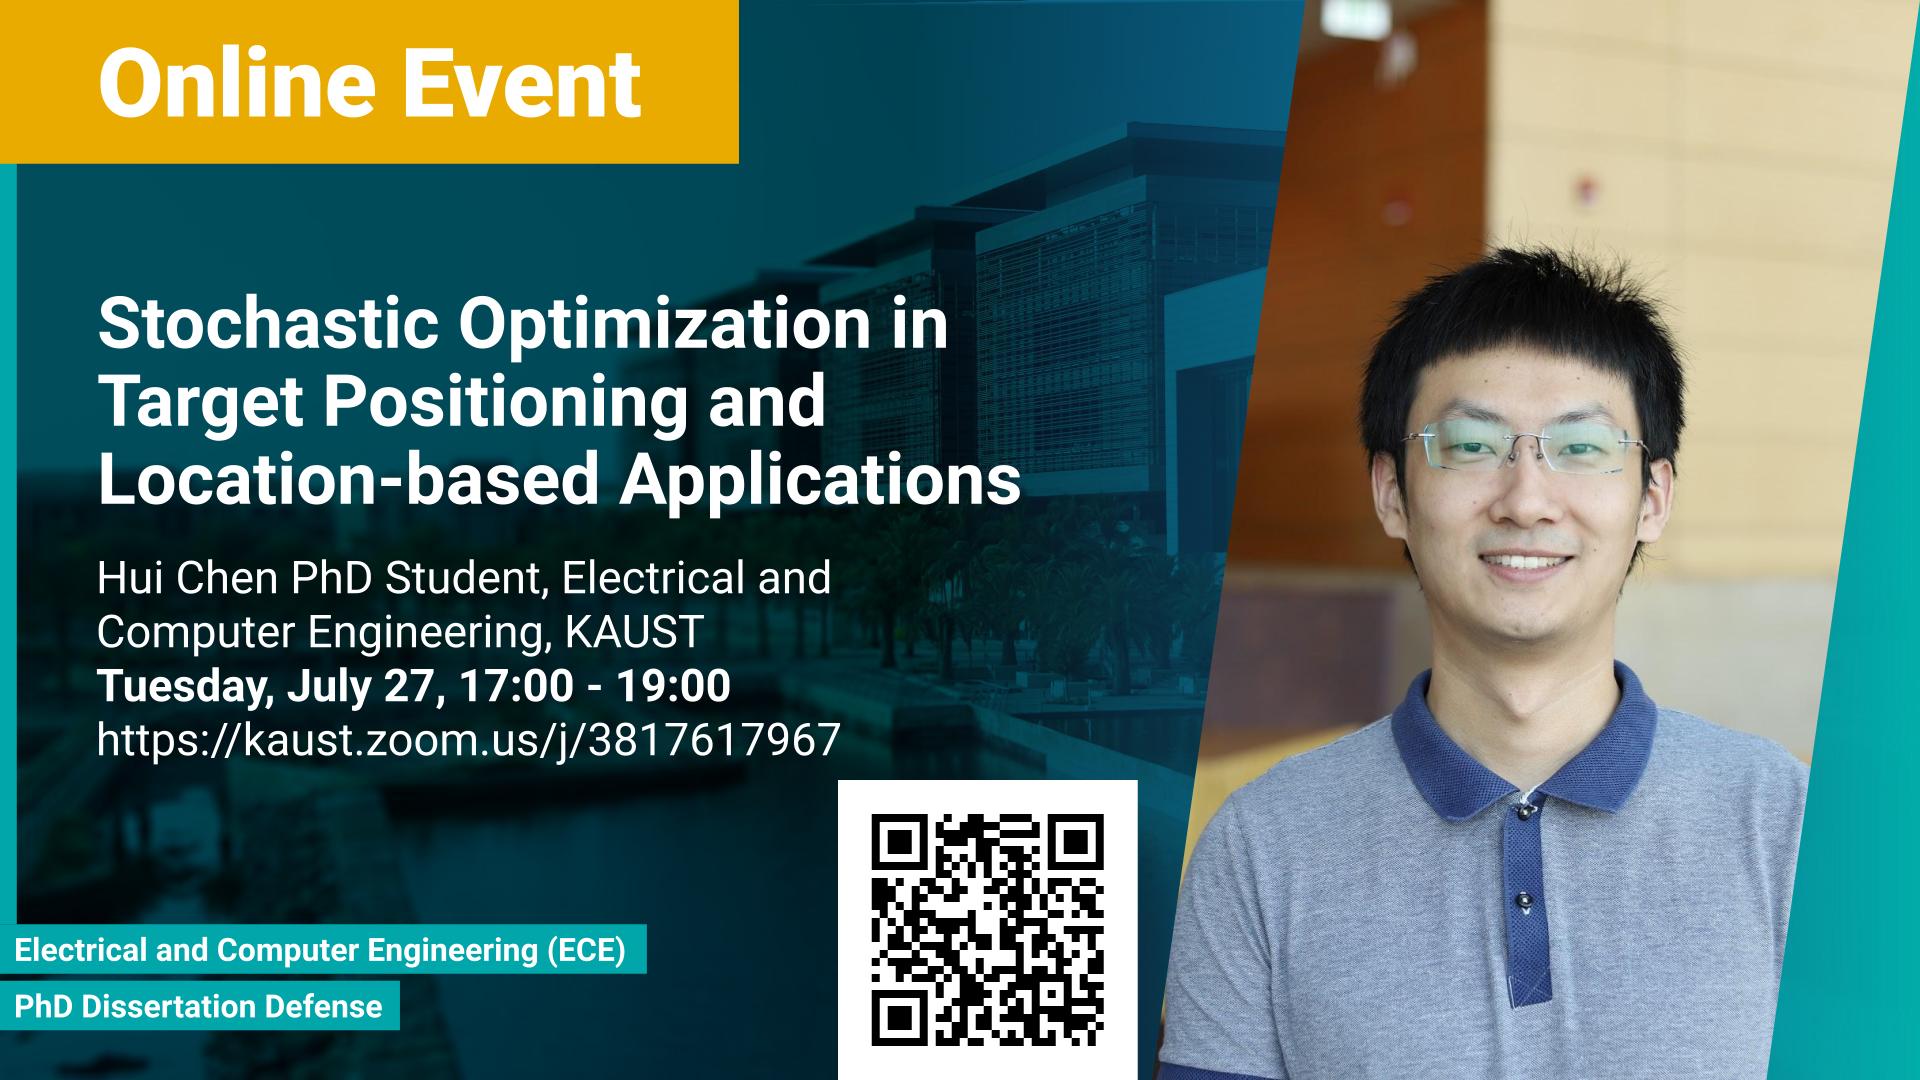 KAUST CEMSE ECE PhD Dissertation Defense Hui Chen Stochastic Optimization in Target Positioning and Location based Applications